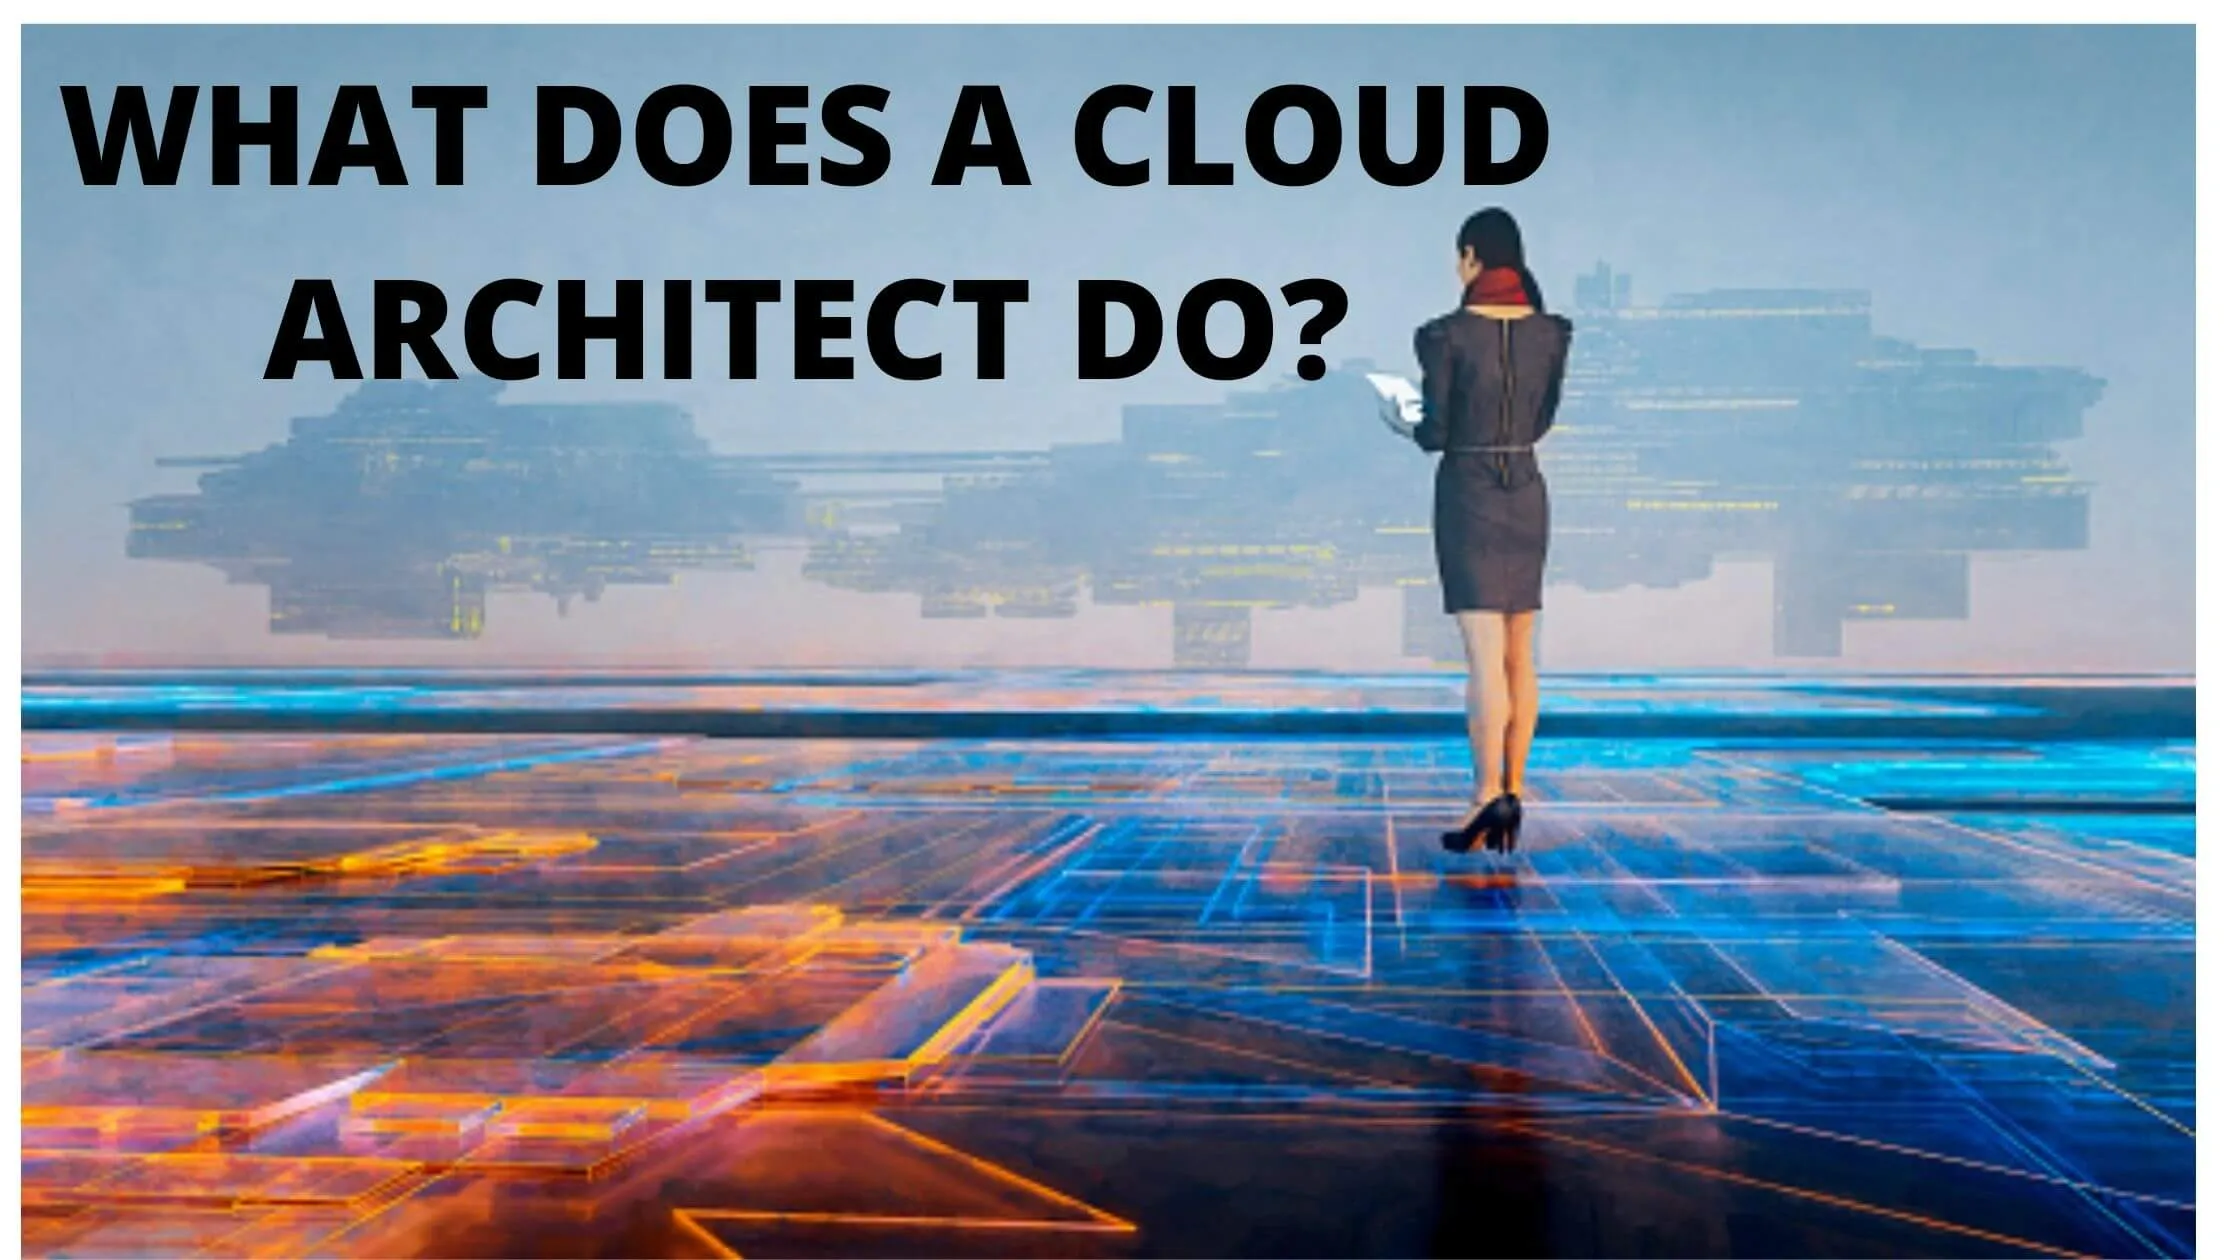 What Does a Cloud Architect Do?